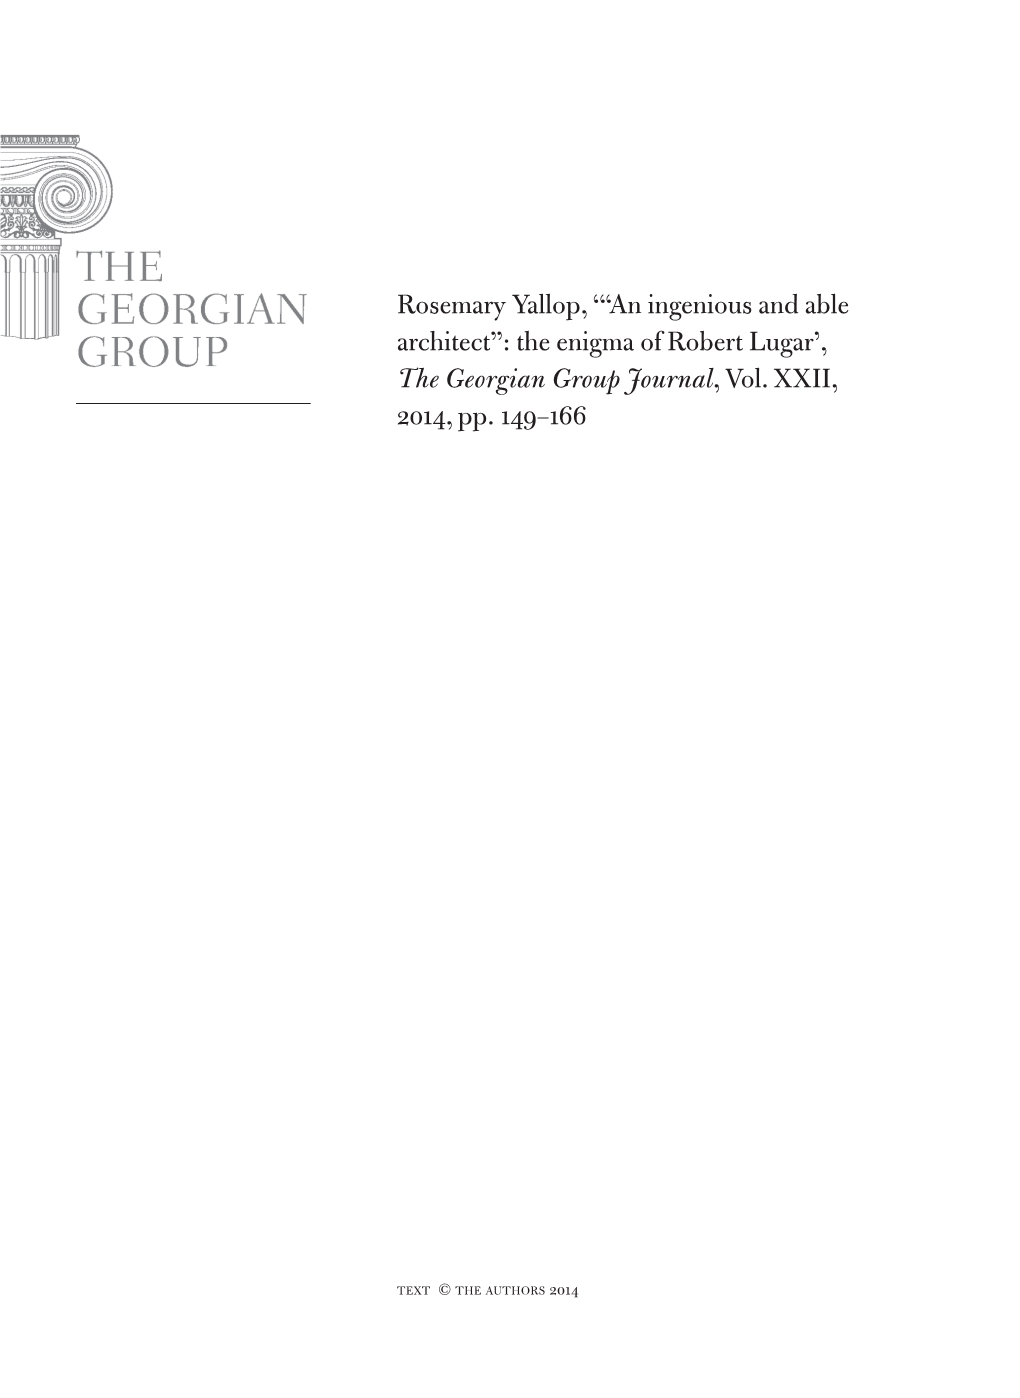 “An Ingenious and Able Architect”: the Enigma of Robert Lugar’, the Georgian Group Journal, Vol